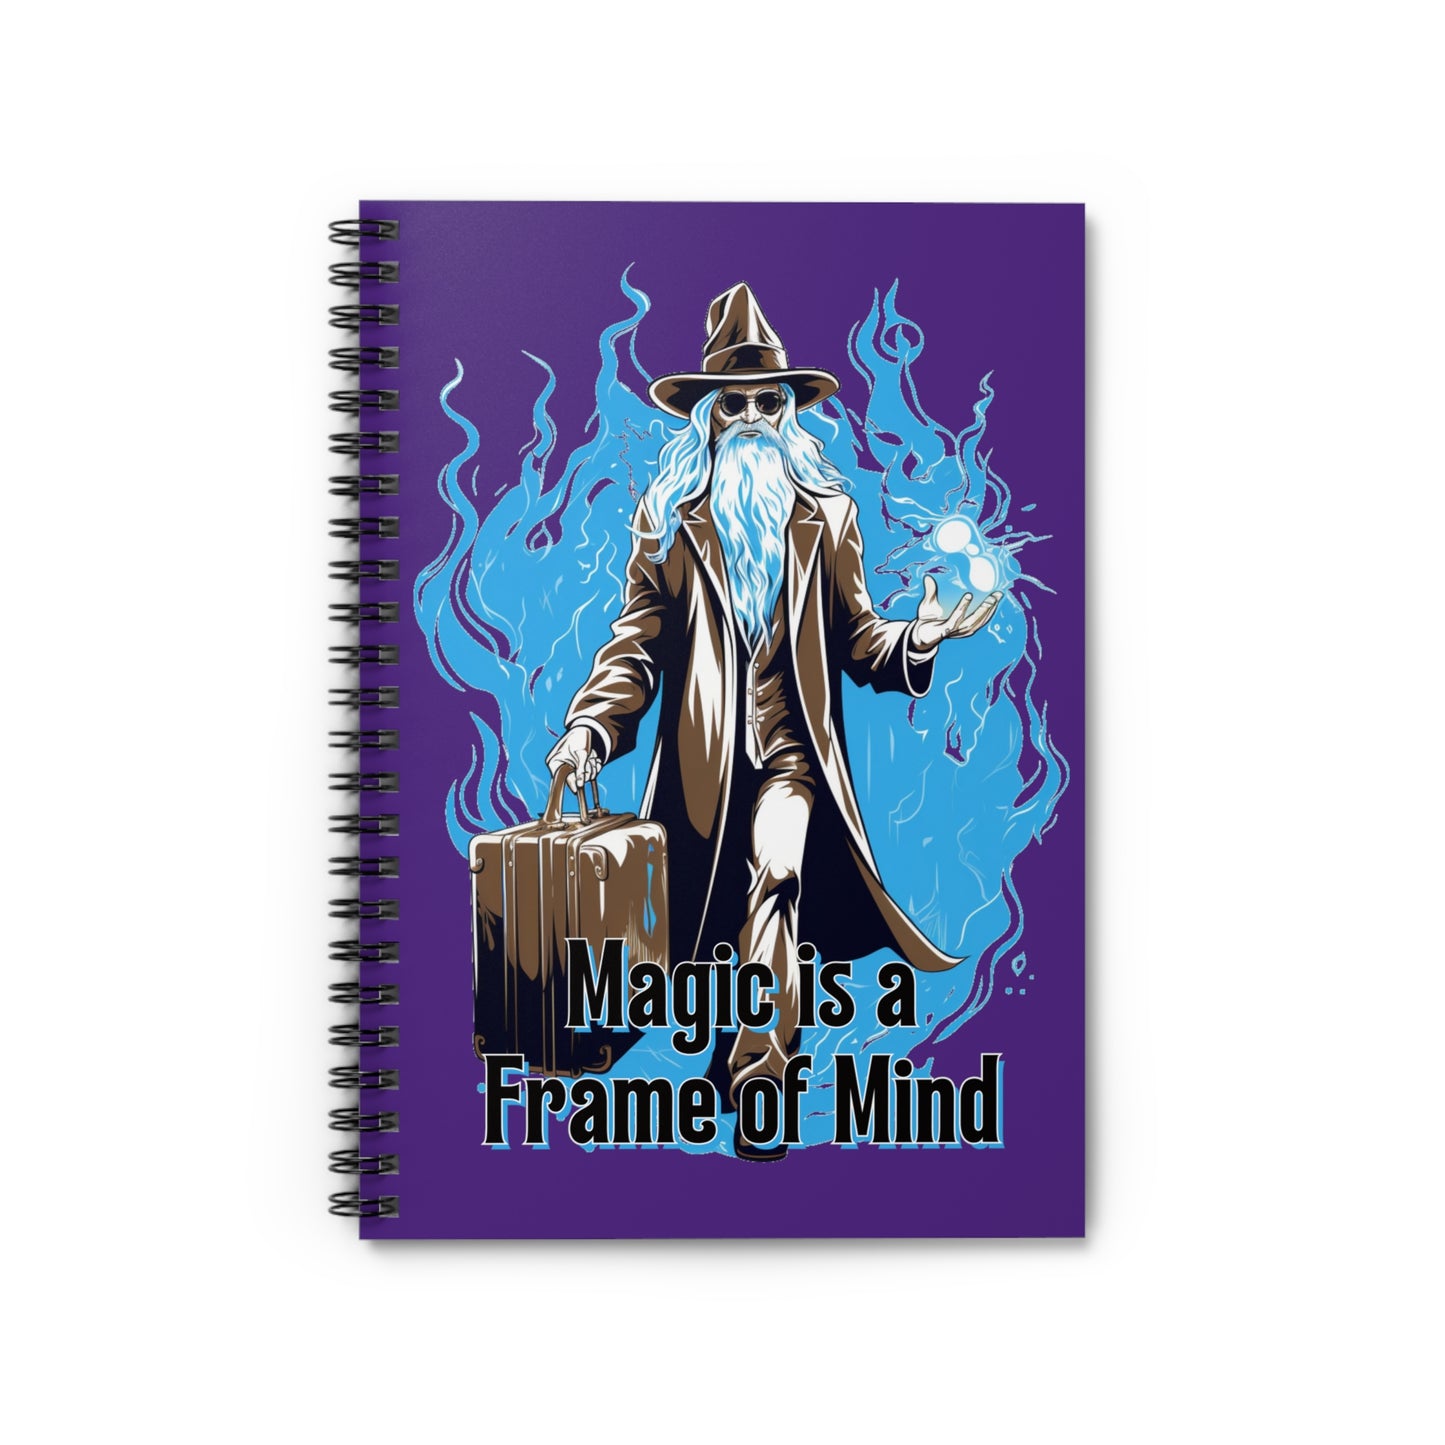 Magic is a Frame of Mind | Spiral Notebook - Ruled Line